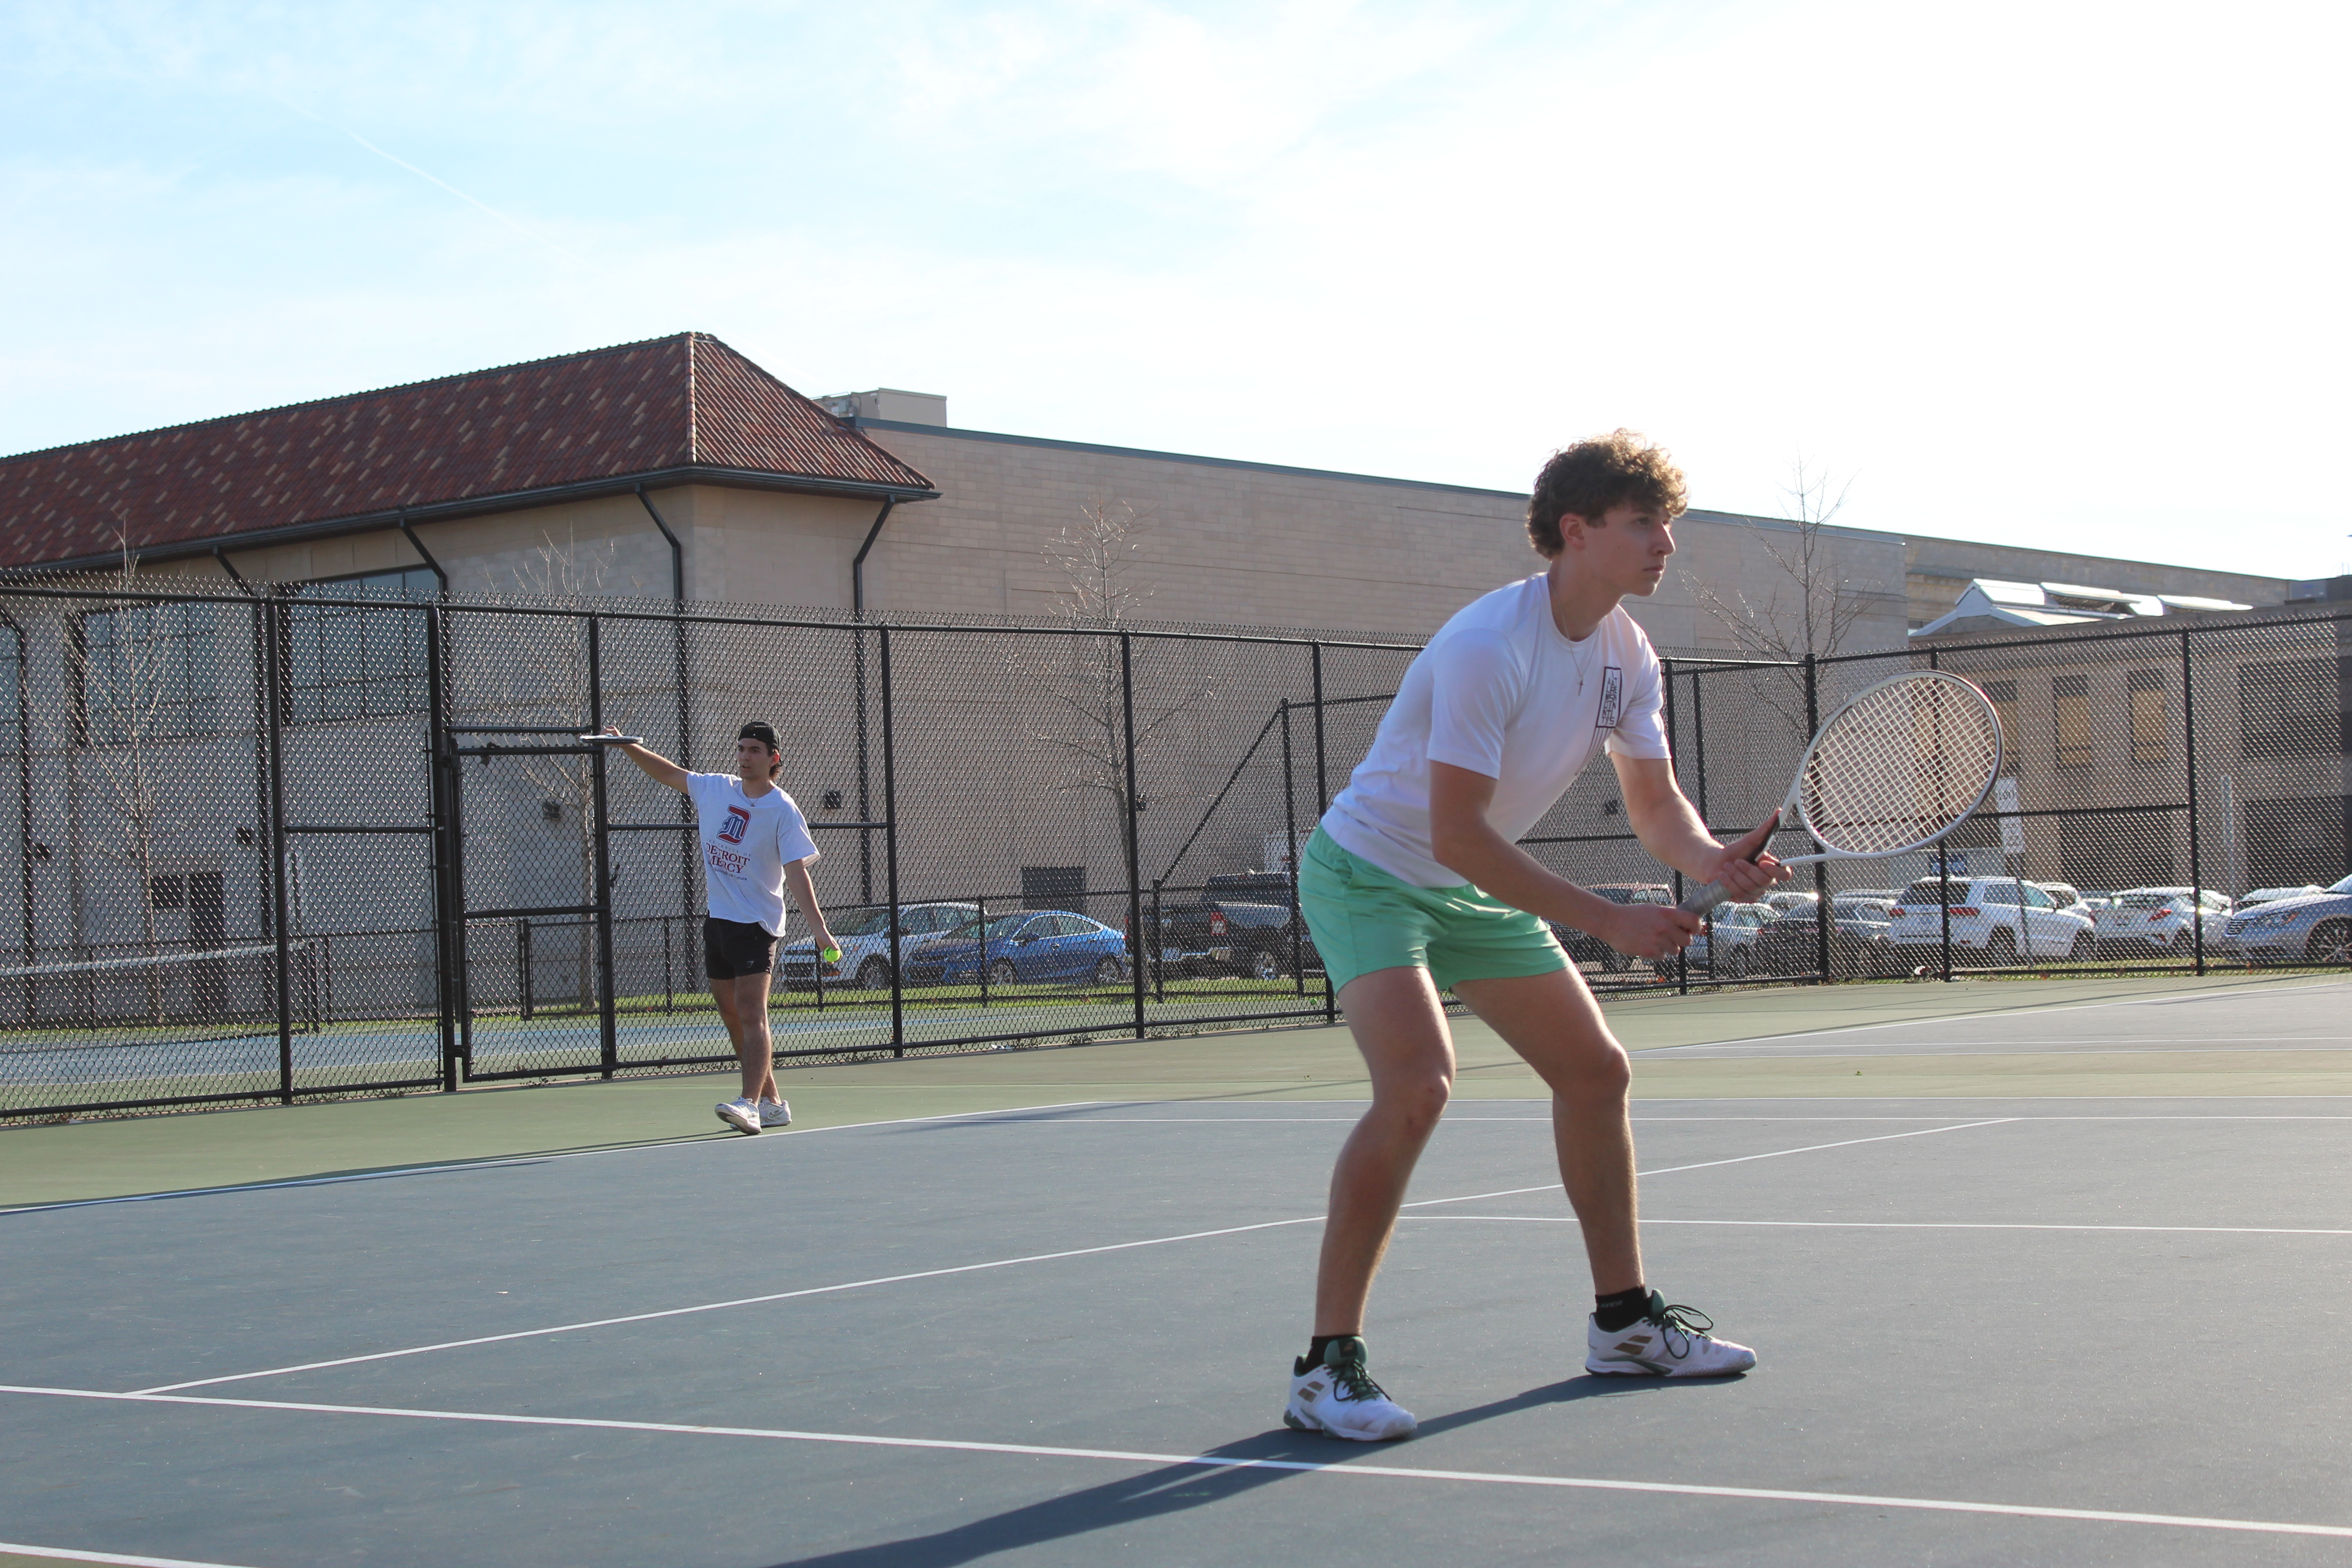 Two students play tennis outdoors on courts with buildings and cars behind them.